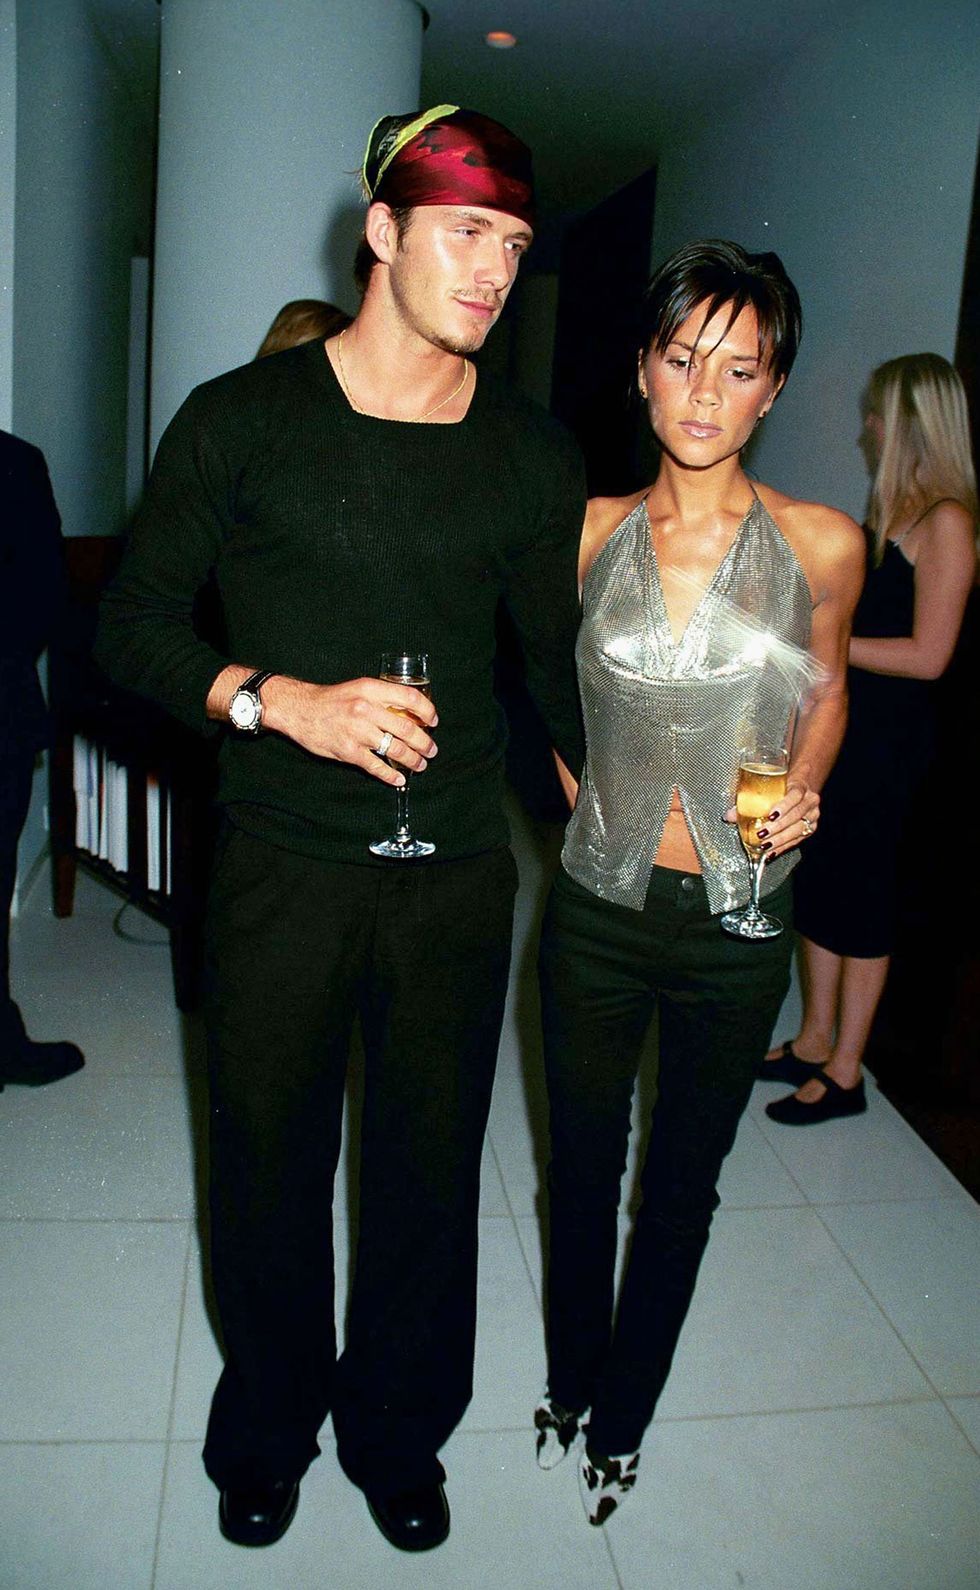 london, england september 20 footballer david beckham and singer victoria beckham attend the launch of jade jaggers jewellery range on september 20, 1999 in london, england photo by dave m benettgetty images